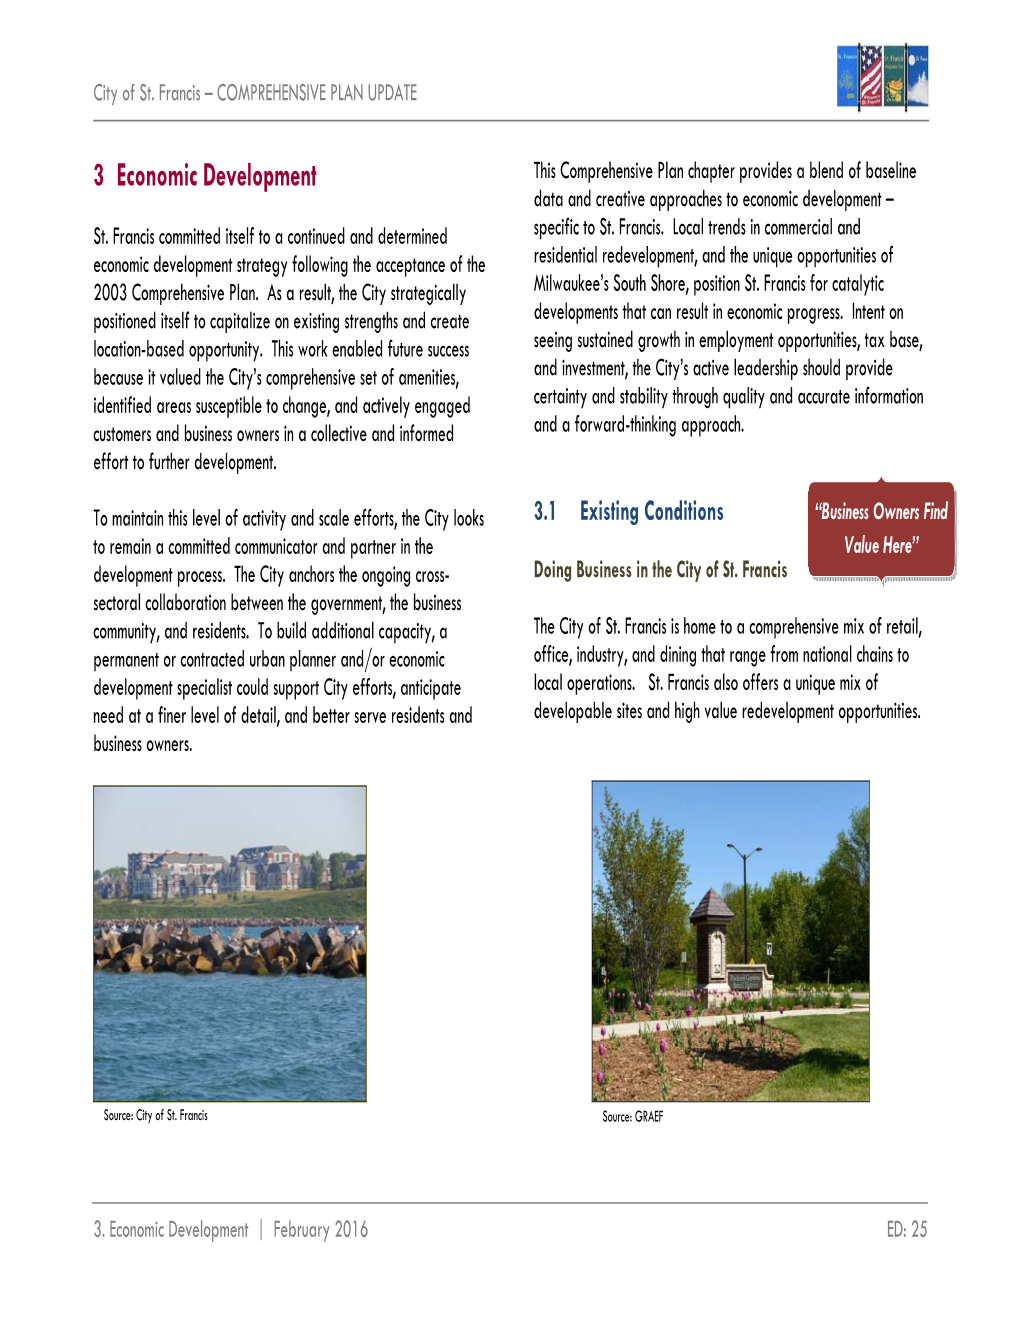 3 Economic Development This Comprehensive Plan Chapter Provides a Blend of Baseline Data and Creative Approaches to Economic Development – St